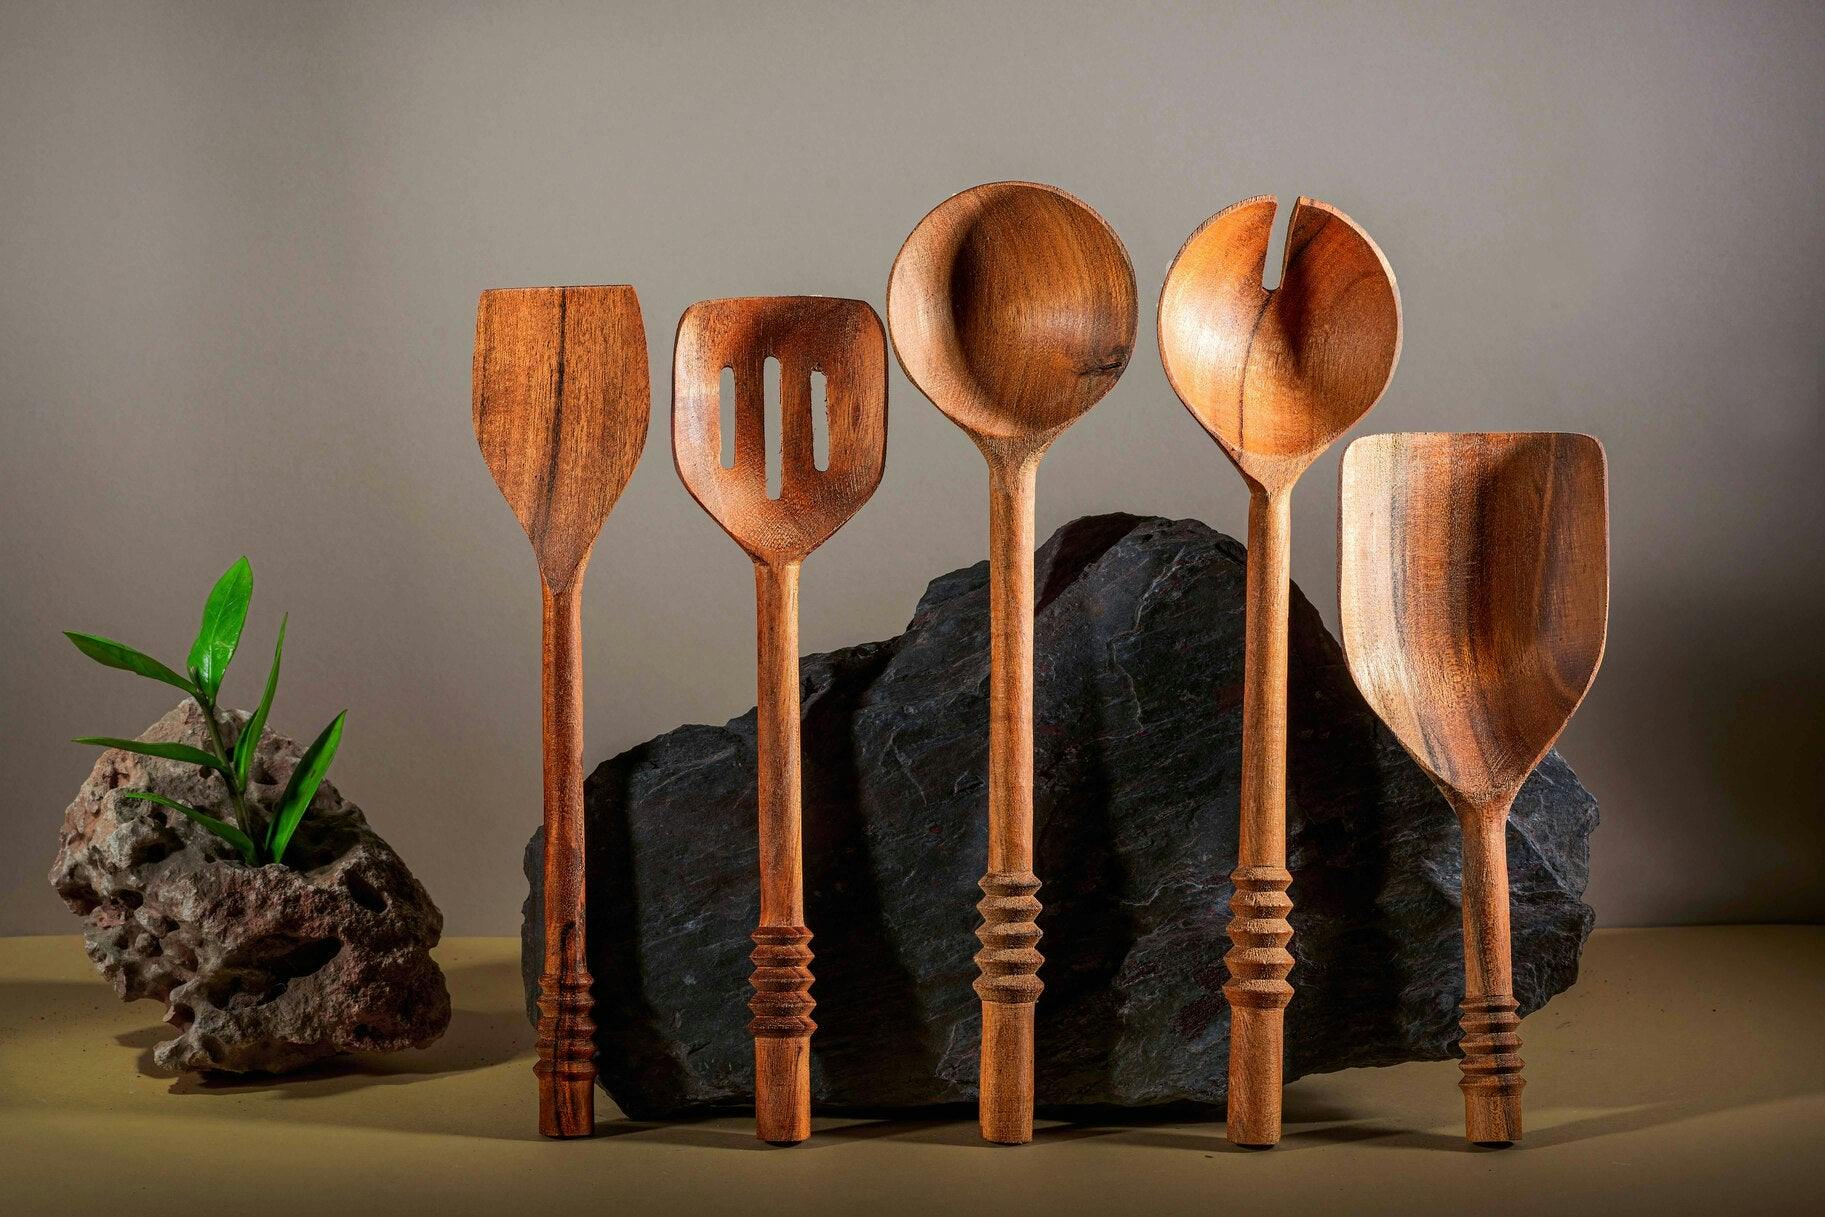 Garoh- Acacia Wood Cutlery Set | 5 Pieces, a product by Hello December